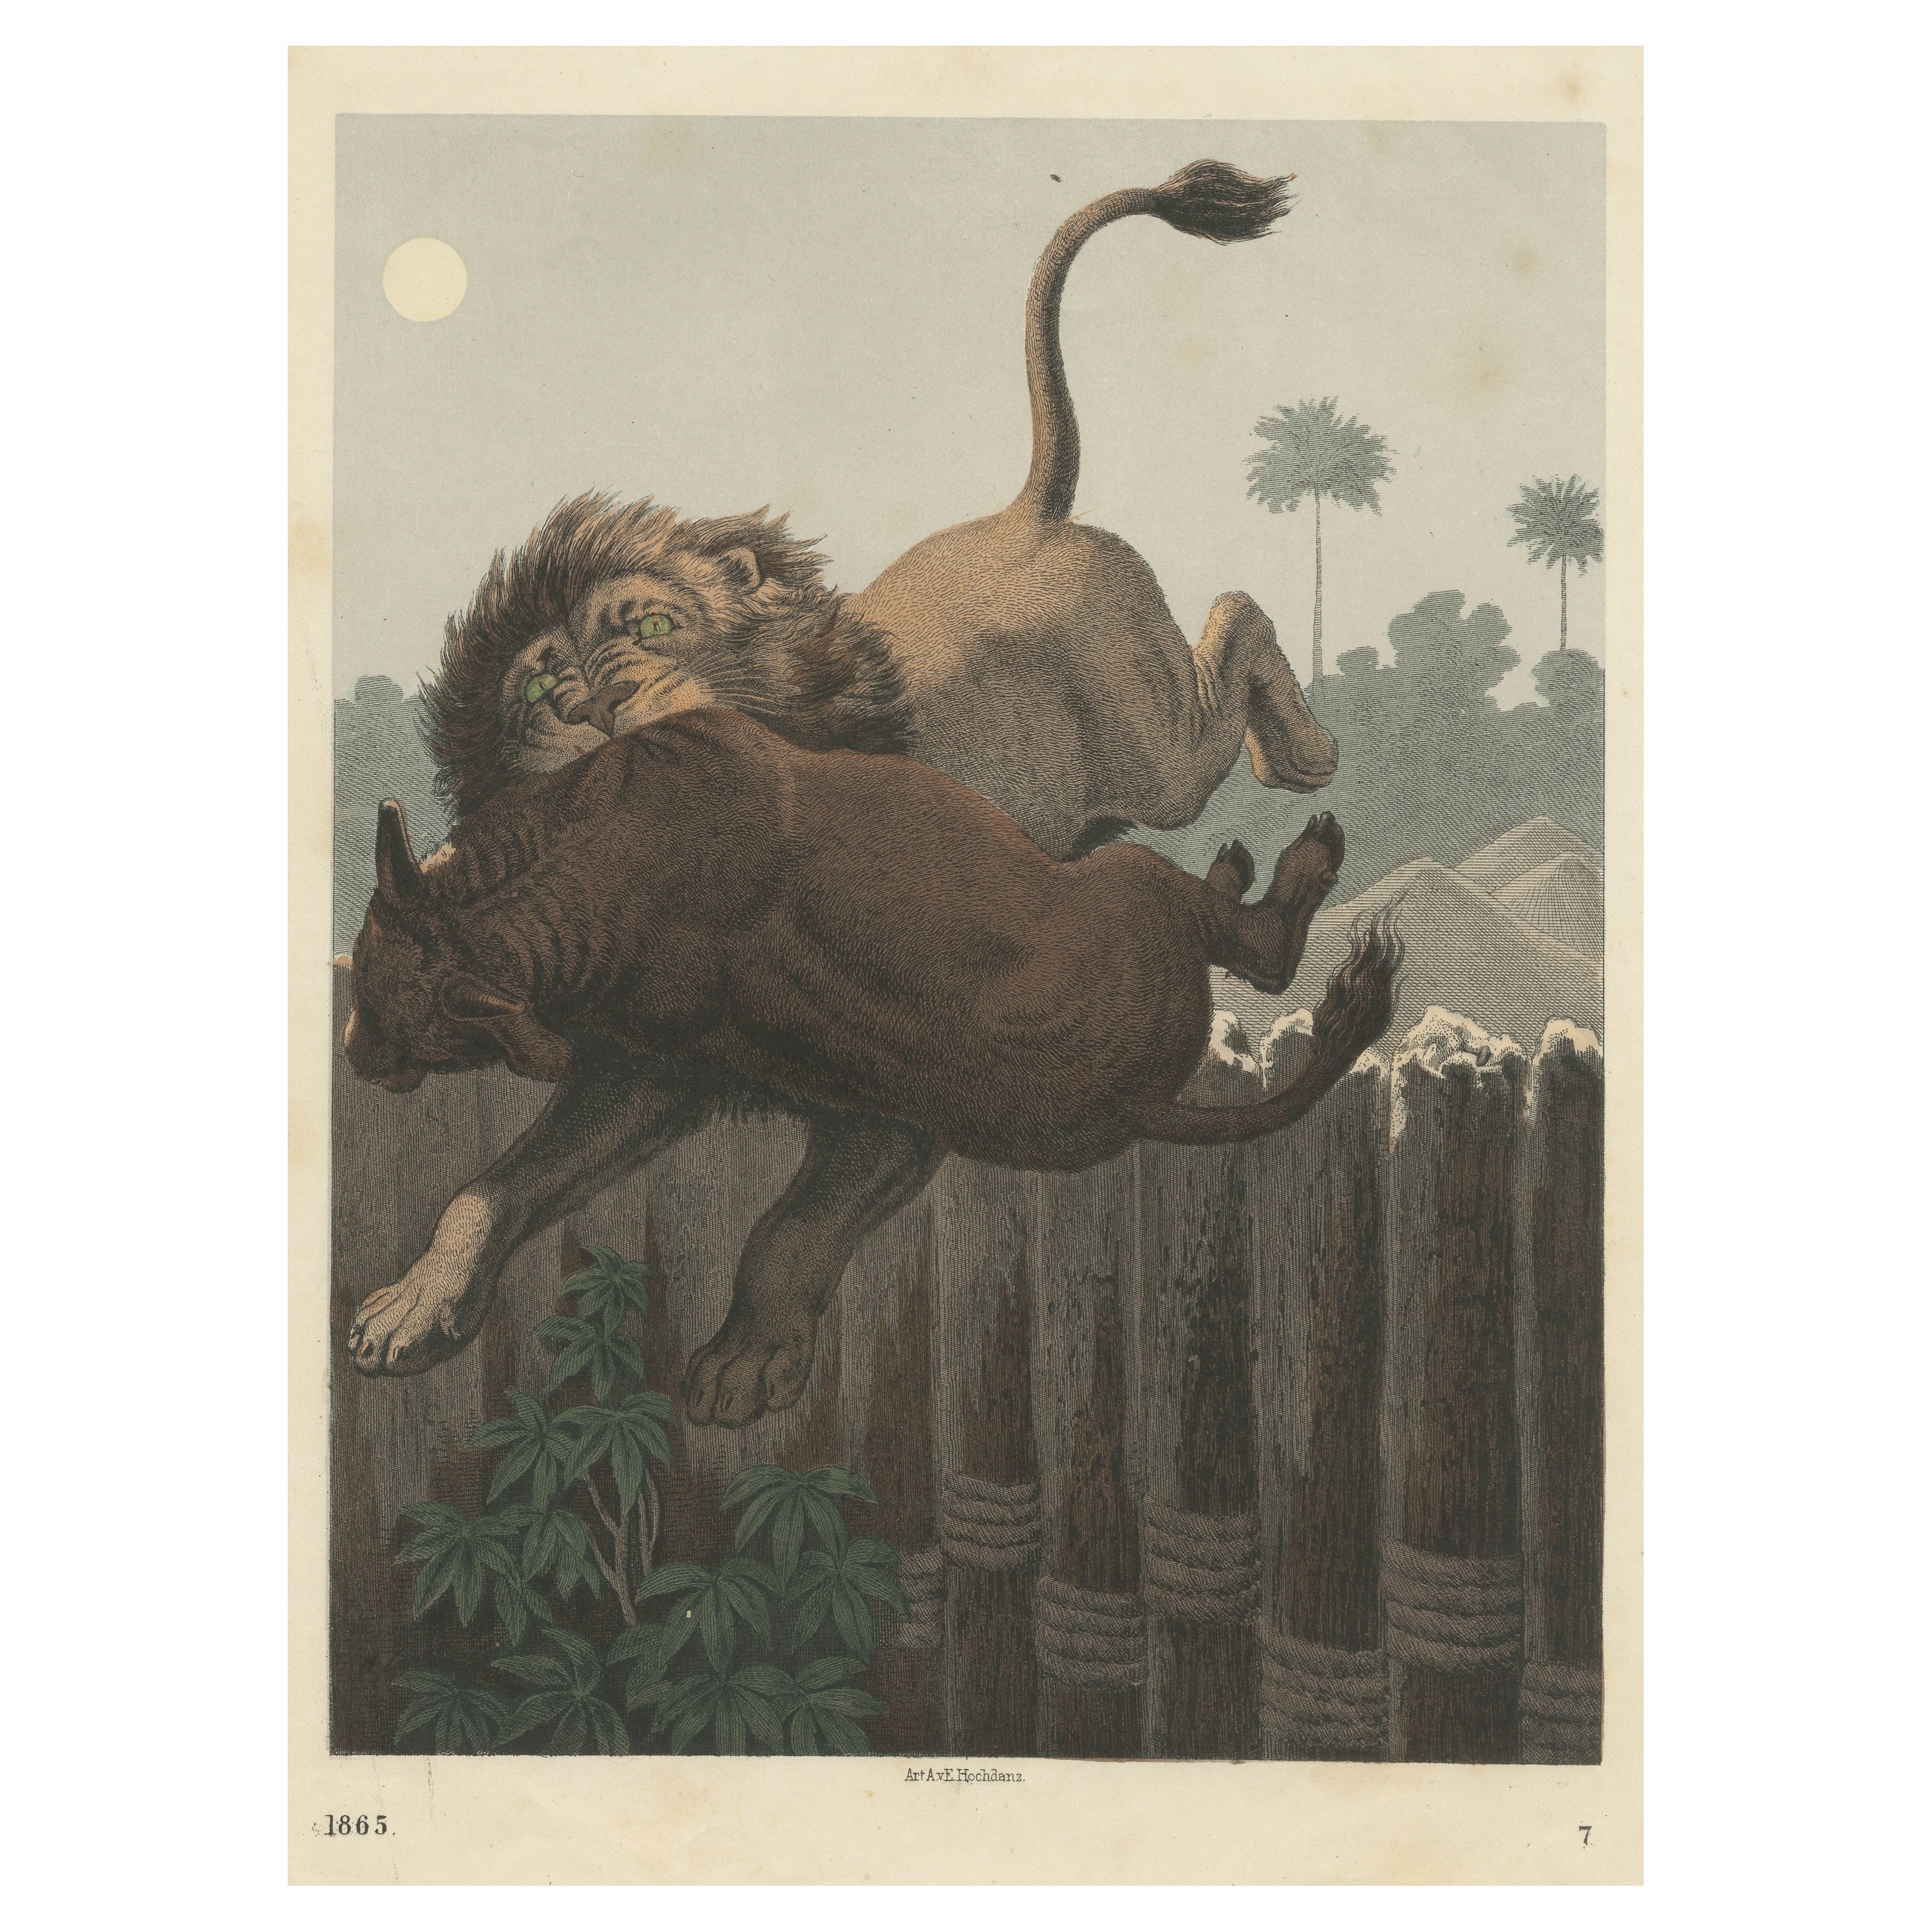 Antique Print of a Lion Attack published circa 1865